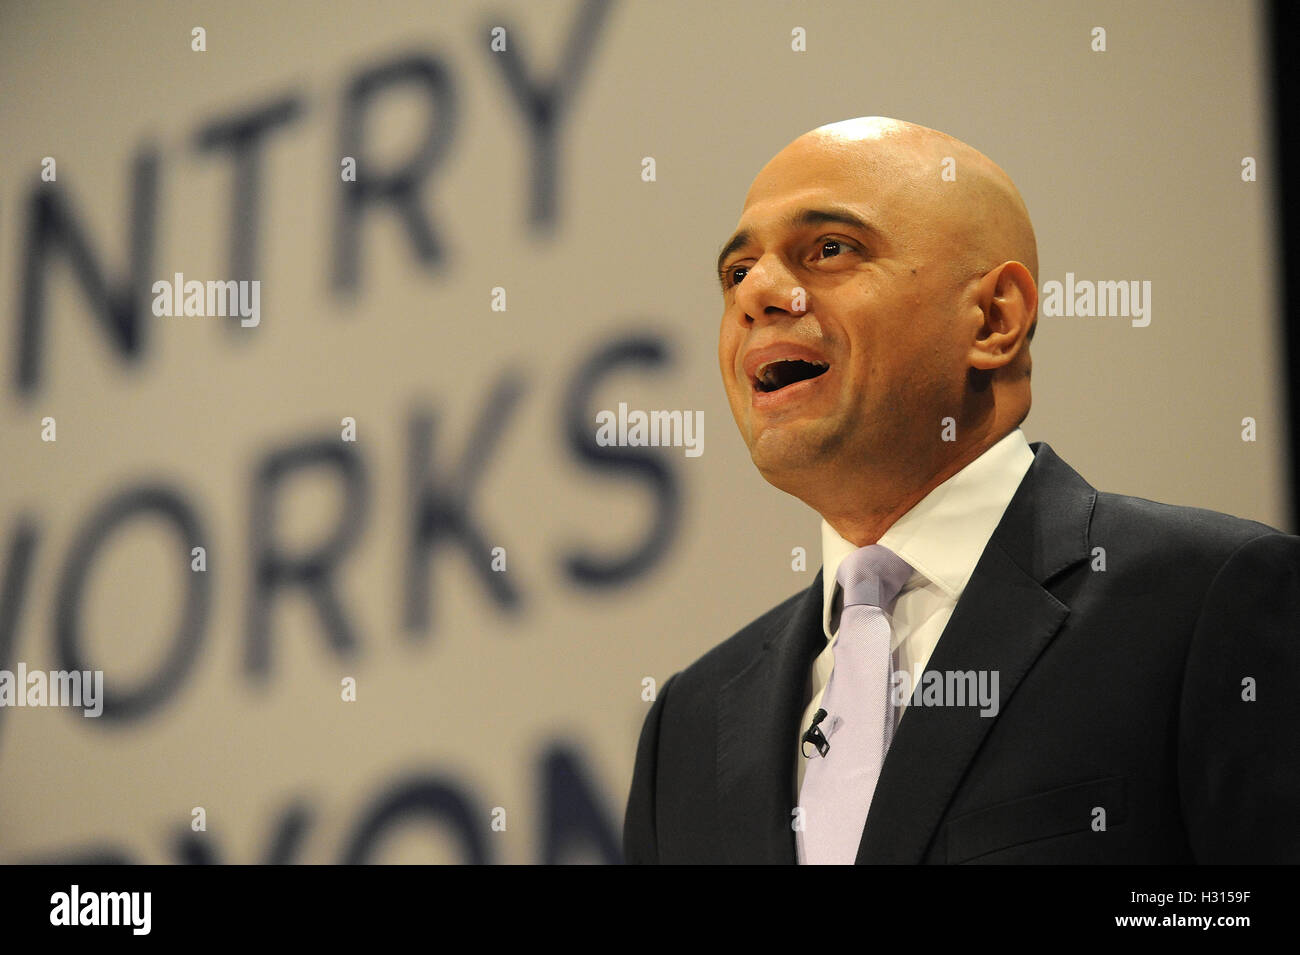 Birmingham, UK. 3rd October, 2016.  Sajid Javid, Secretary of State for Community and Local Government, delivers his speech to conference, on the second day of the Conservative Party Conference at the ICC Birmingham. The theme of the speech was 'An Economy that Works for Everyone'. This conference follows the referendum decision for the UK to leave the European Union, and the subsequent election of Theresa May as  leader of the Conservative Party. Kevin Hayes/Alamy Live News Stock Photo